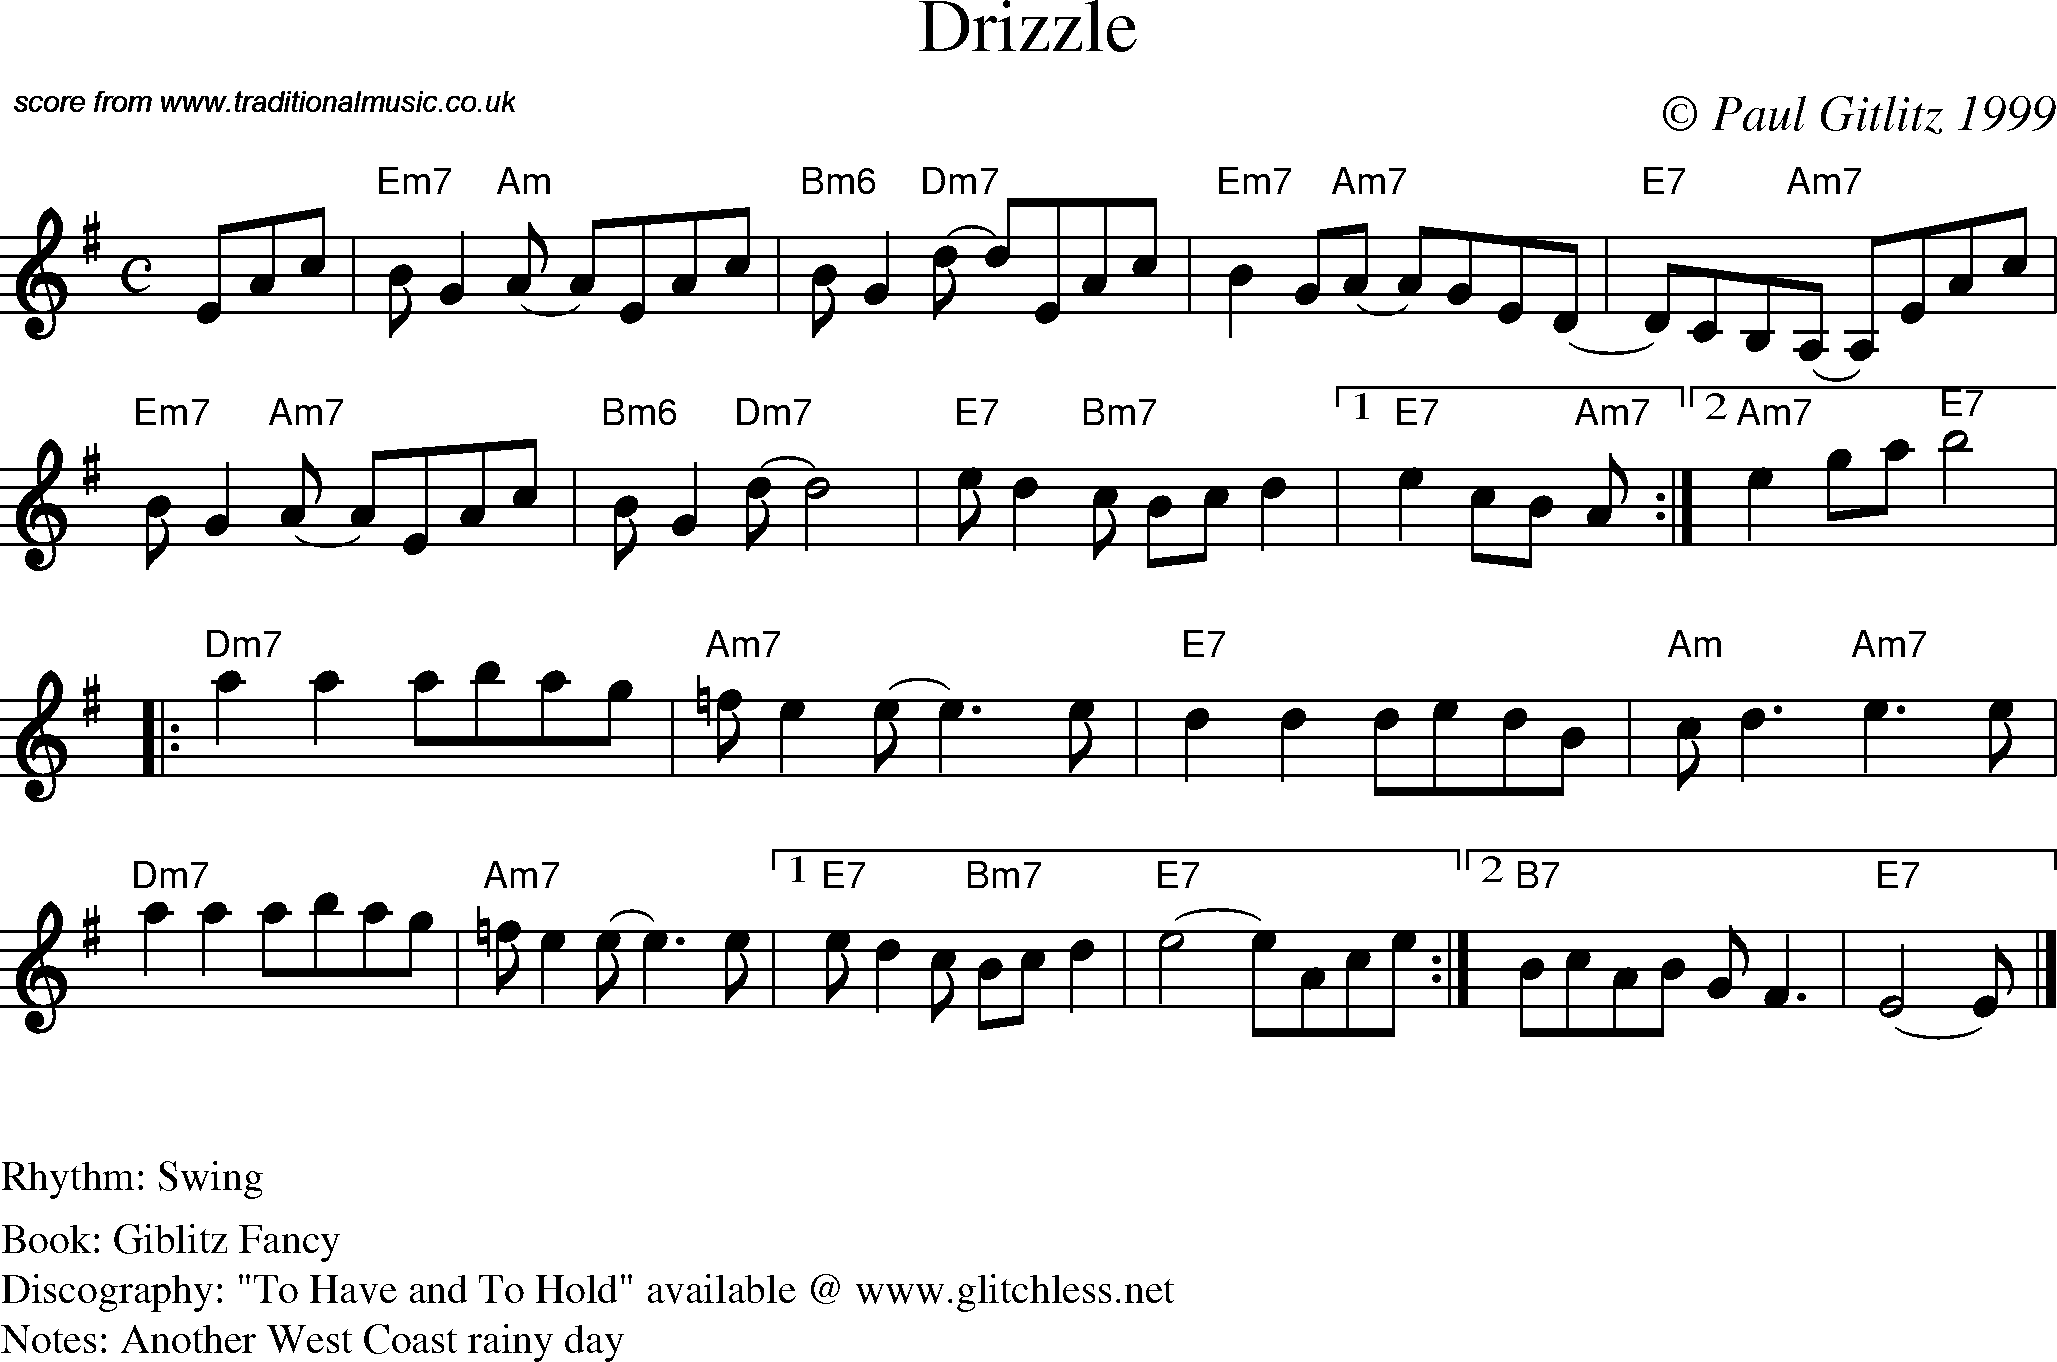 Sheet Music Score for Swing - Drizzle